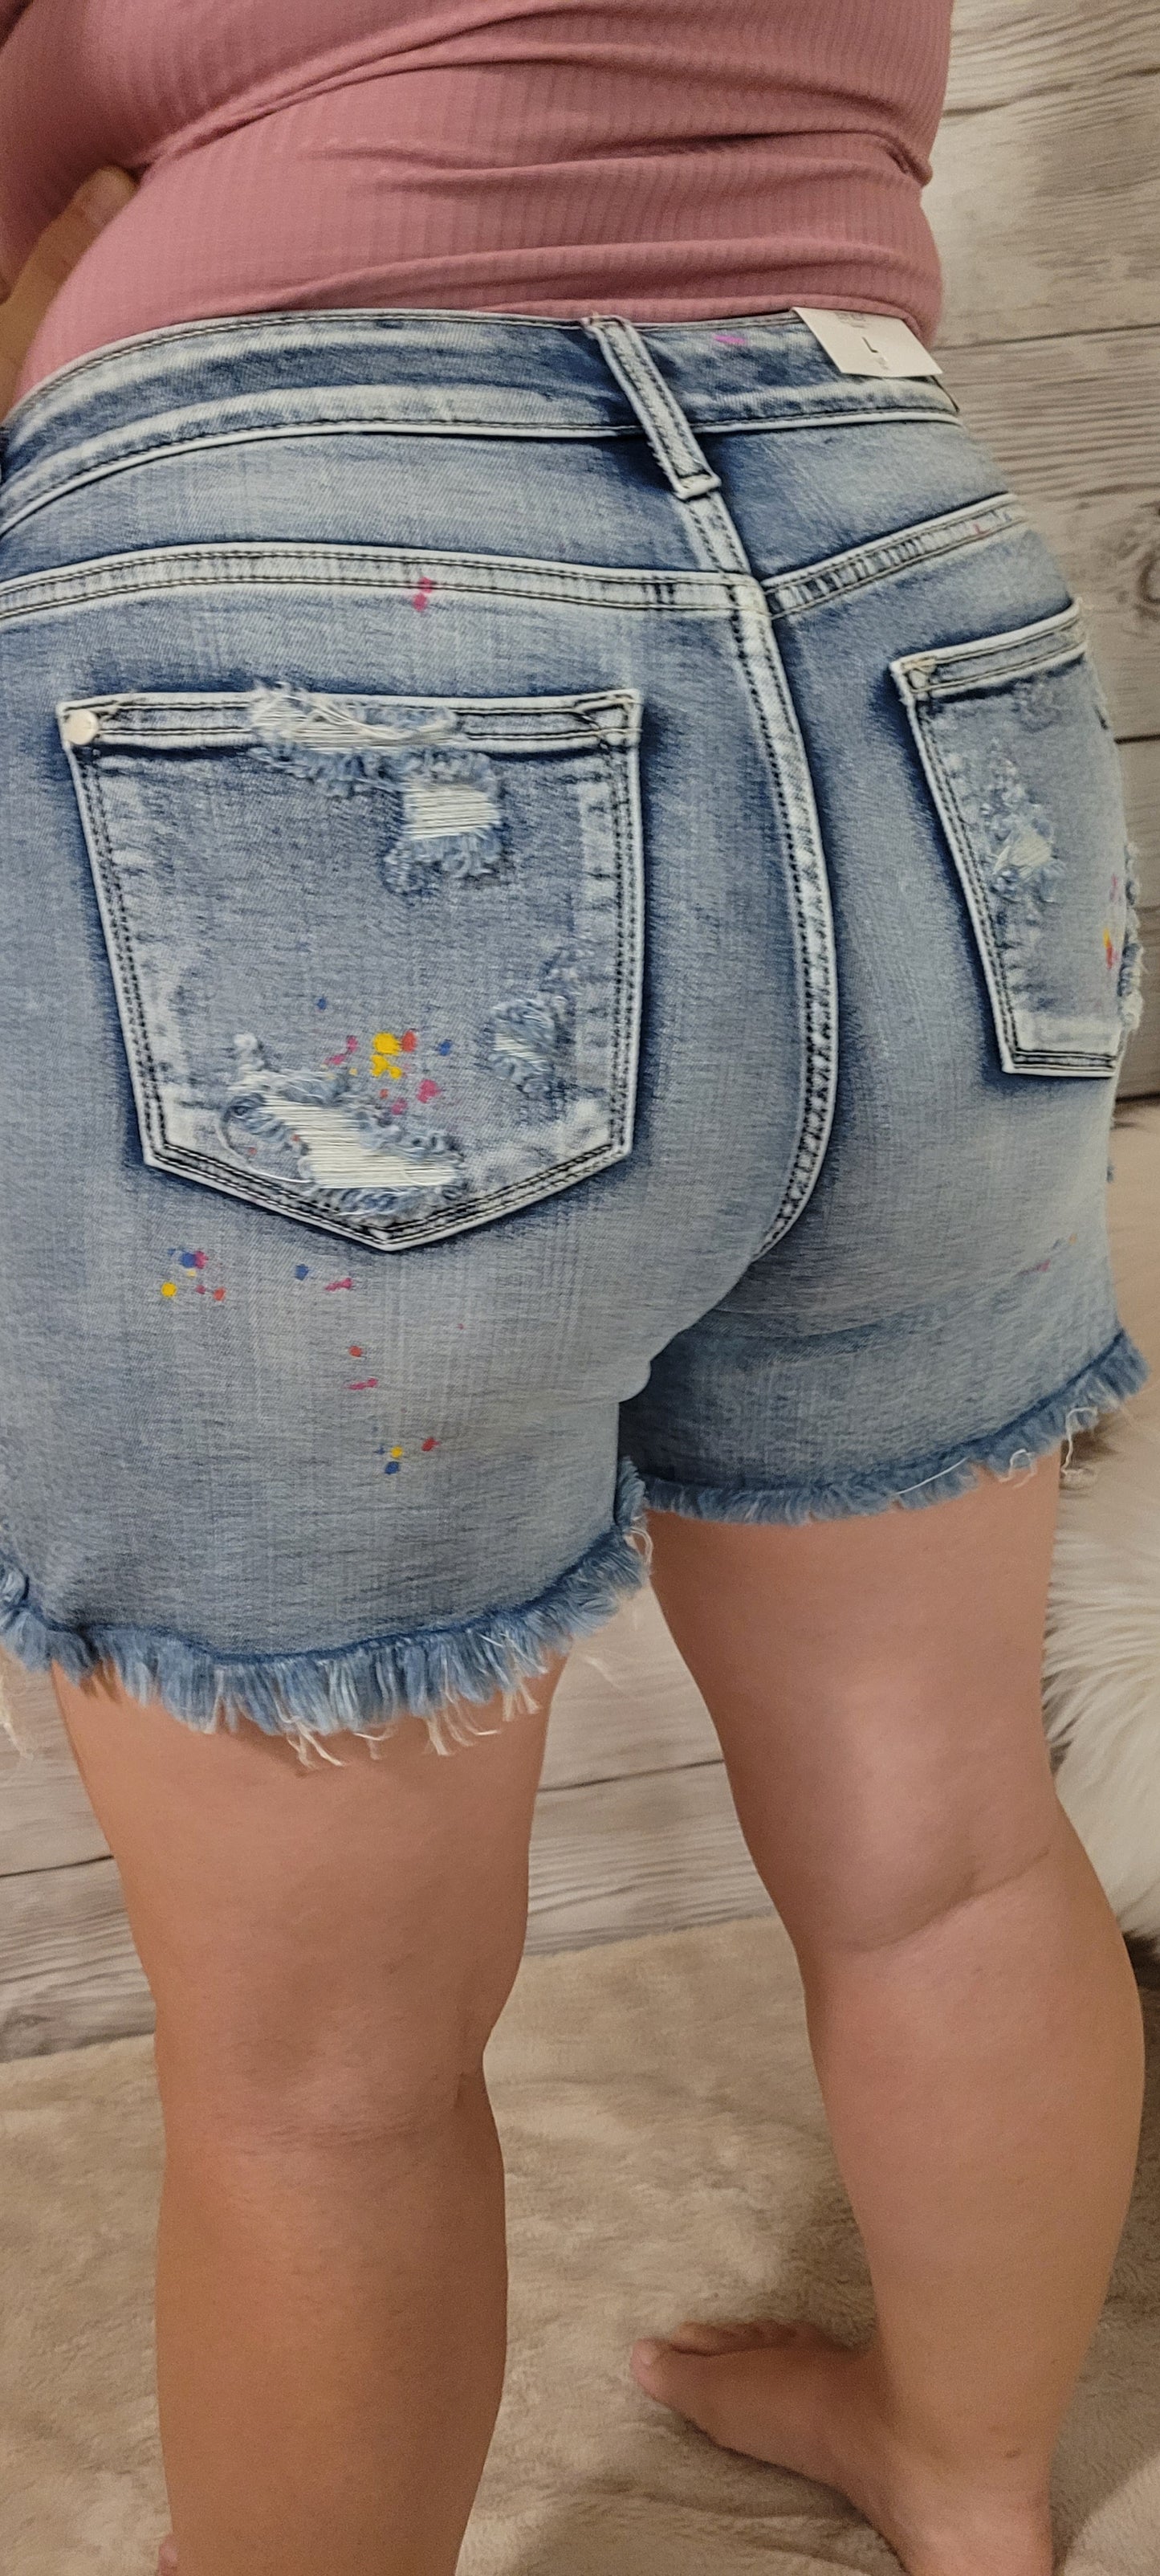 These are mid rise, light wash, distressed shorts featuring paint splatter (blue, yellow, pink), a frayed and distressed hemline, functional pockets in the front and back.  These shorts are stretchy for comfort. Sizes small through x-large.